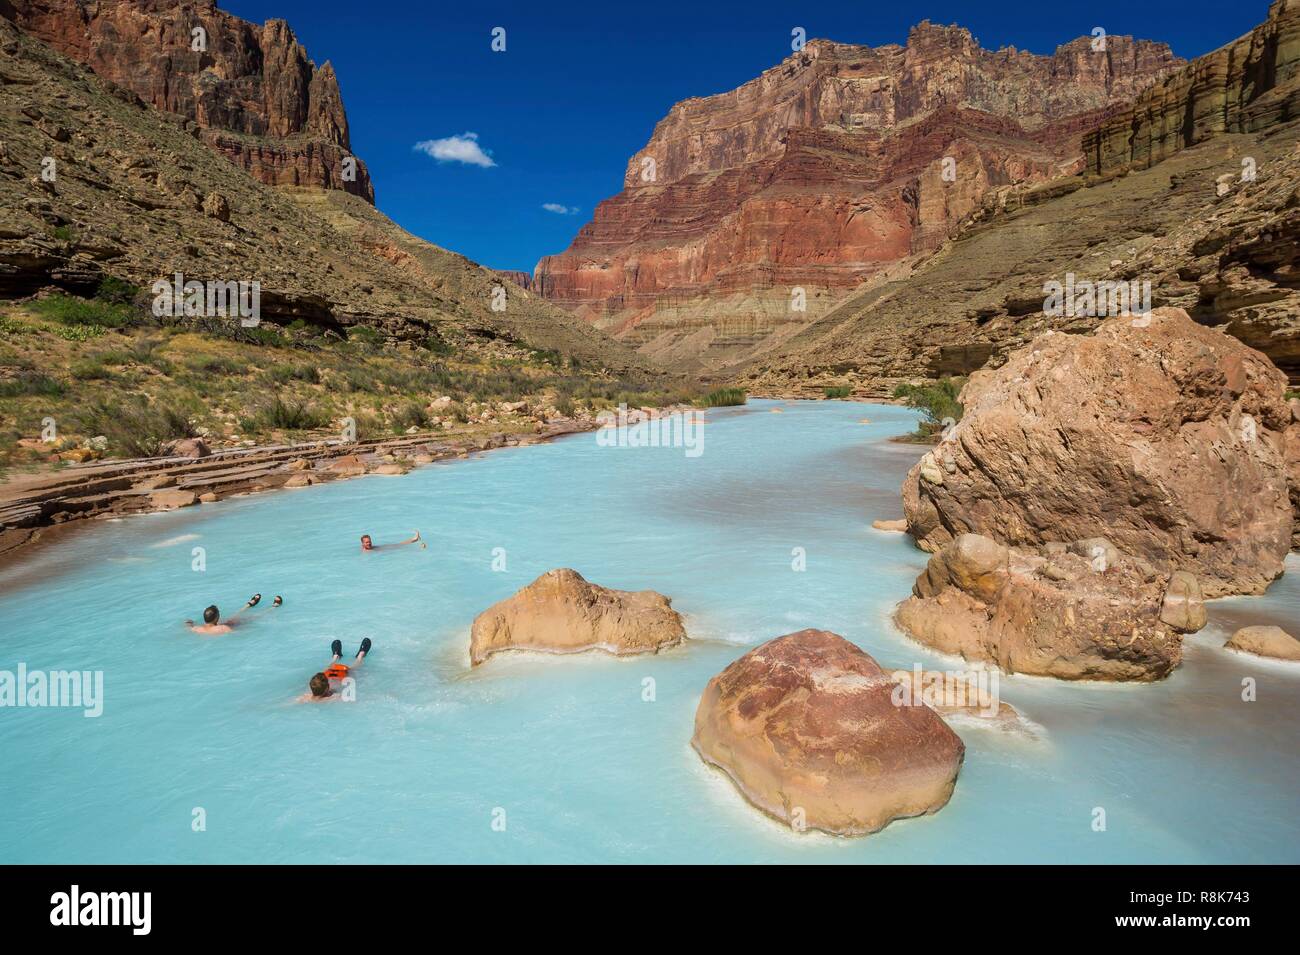 United States, Arizona, Grand Canyon National Park, rafting down the  Colorado river between Lee's Ferry near